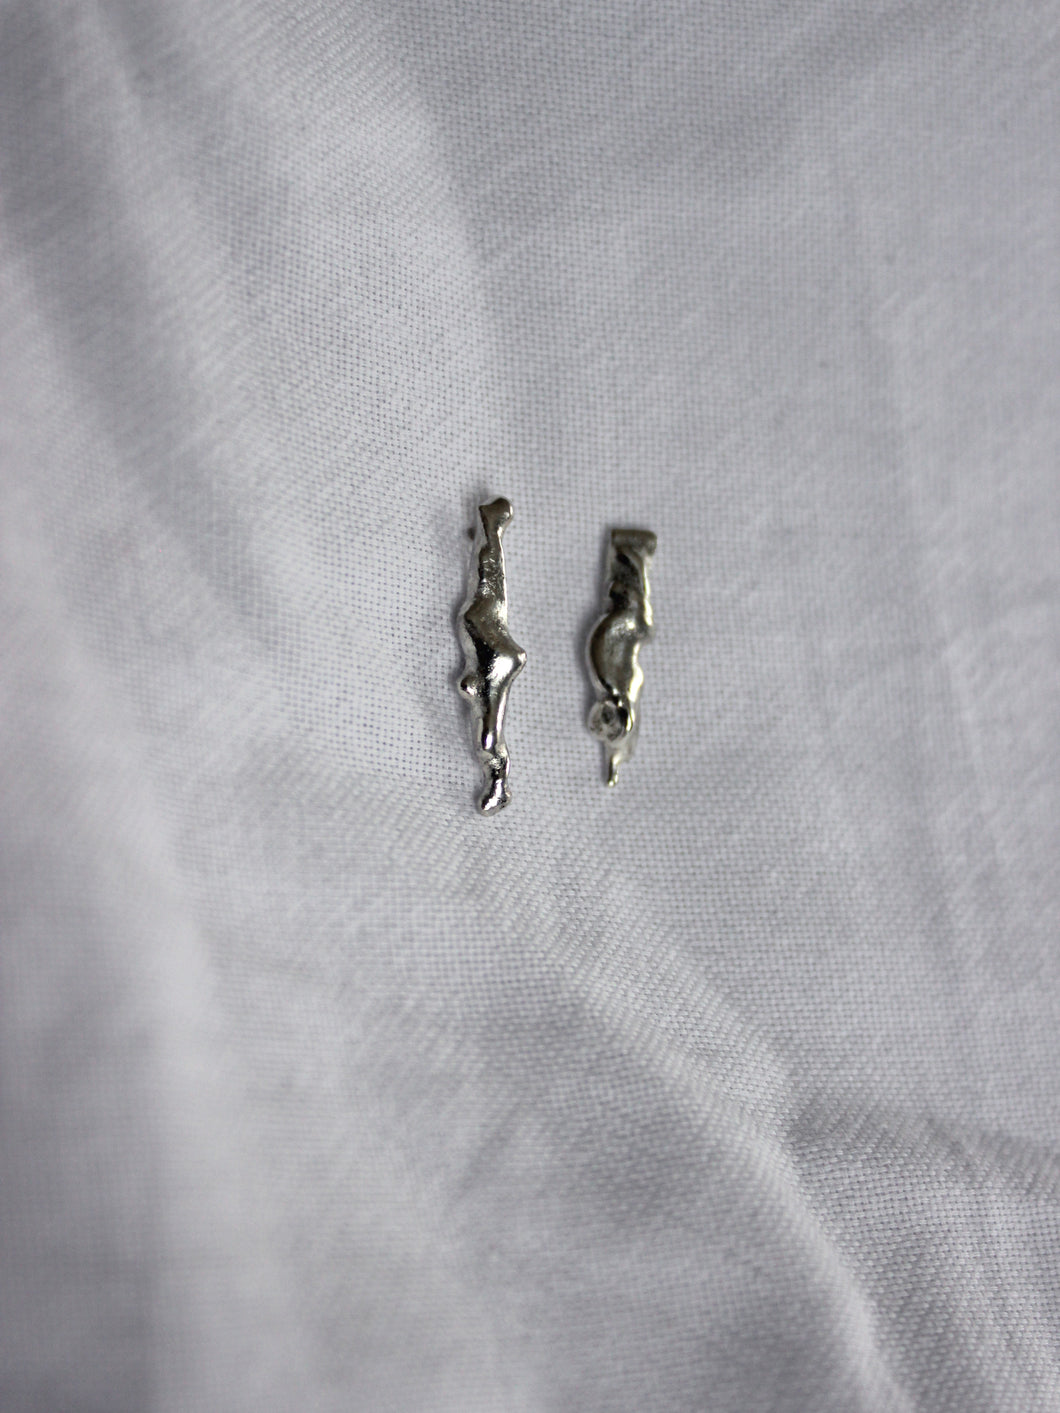 Remelted Earrings